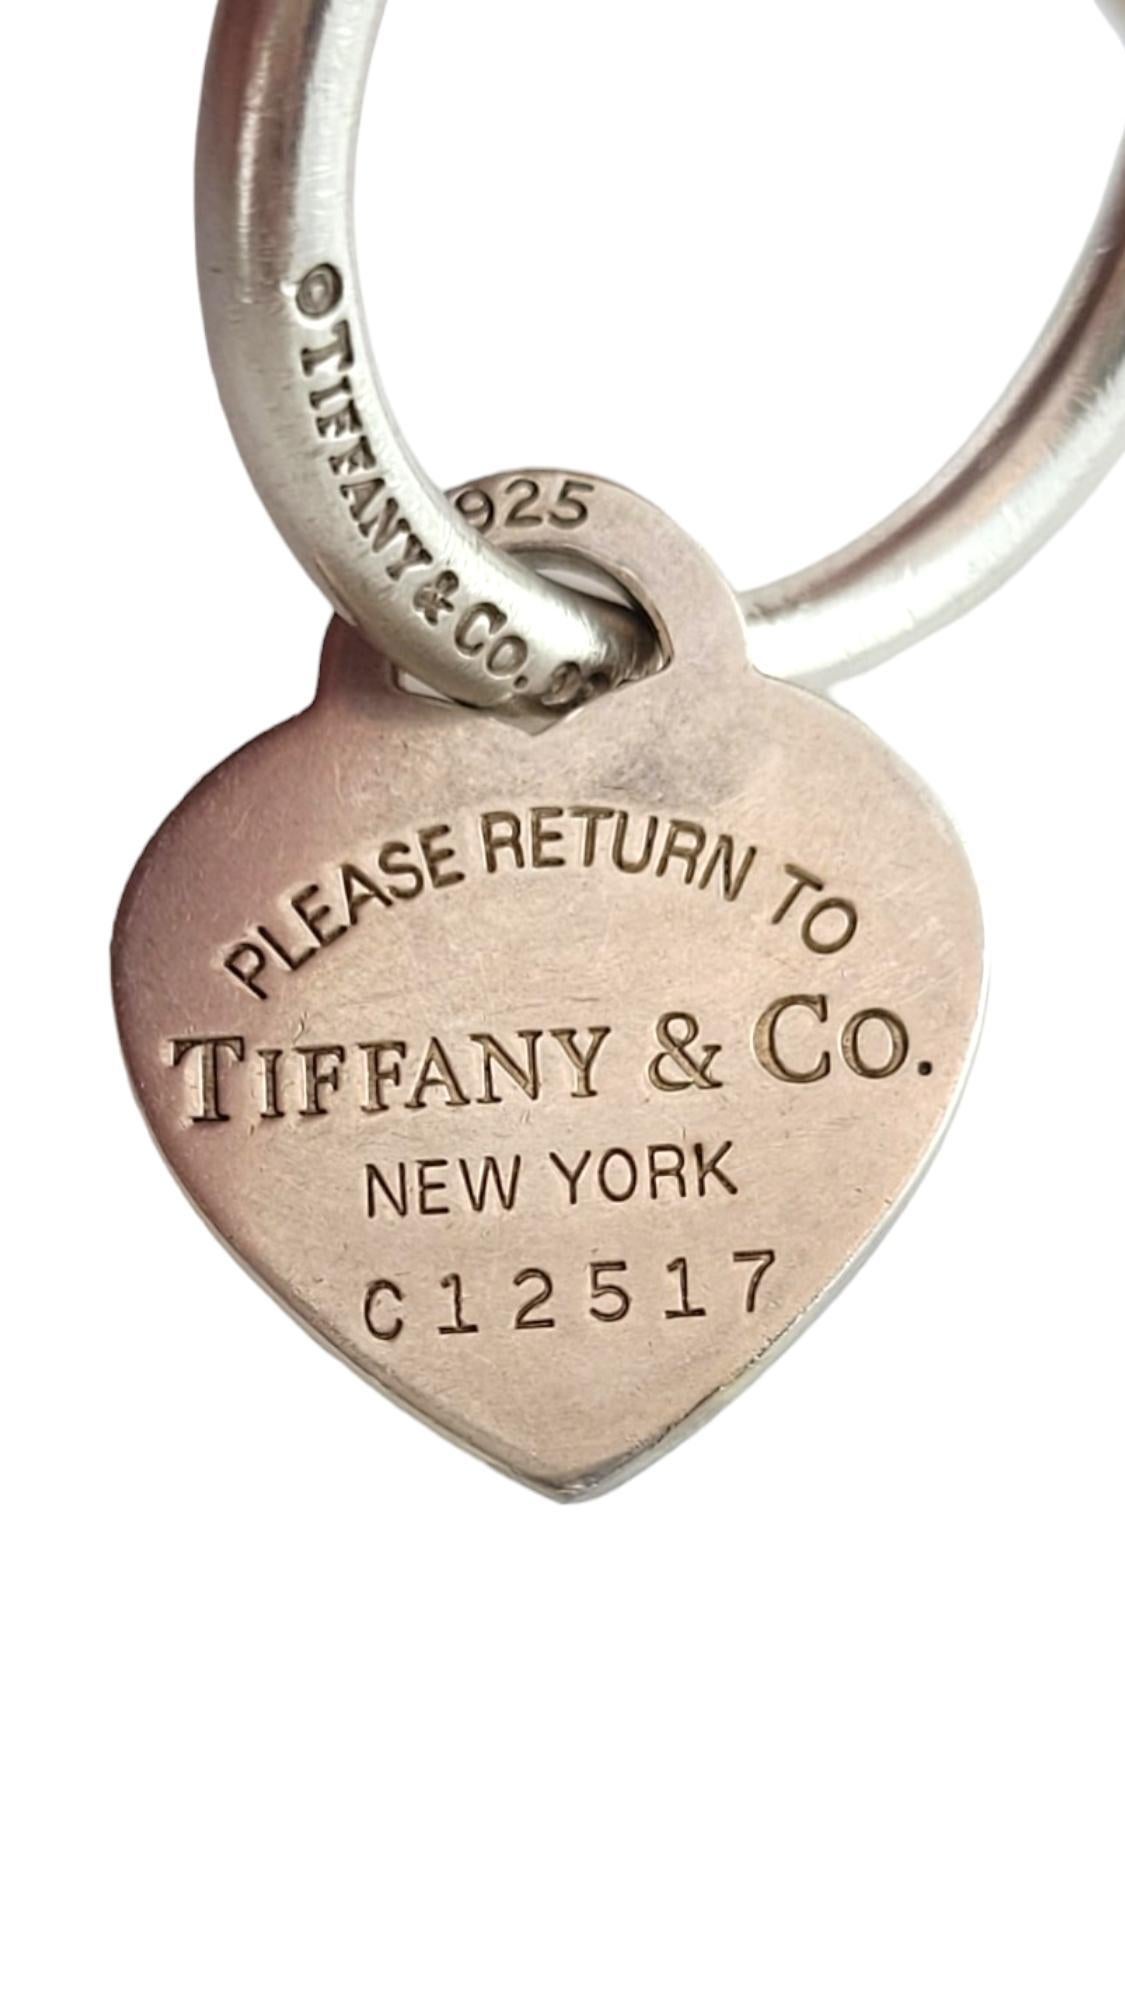 Tiffany & Co. Sterling Silver Return to Tiffany Heart Tag Key Ring

This gorgeous screwball key ring by Tiffany & Co. is crafted from 925 sterling silver and features a 